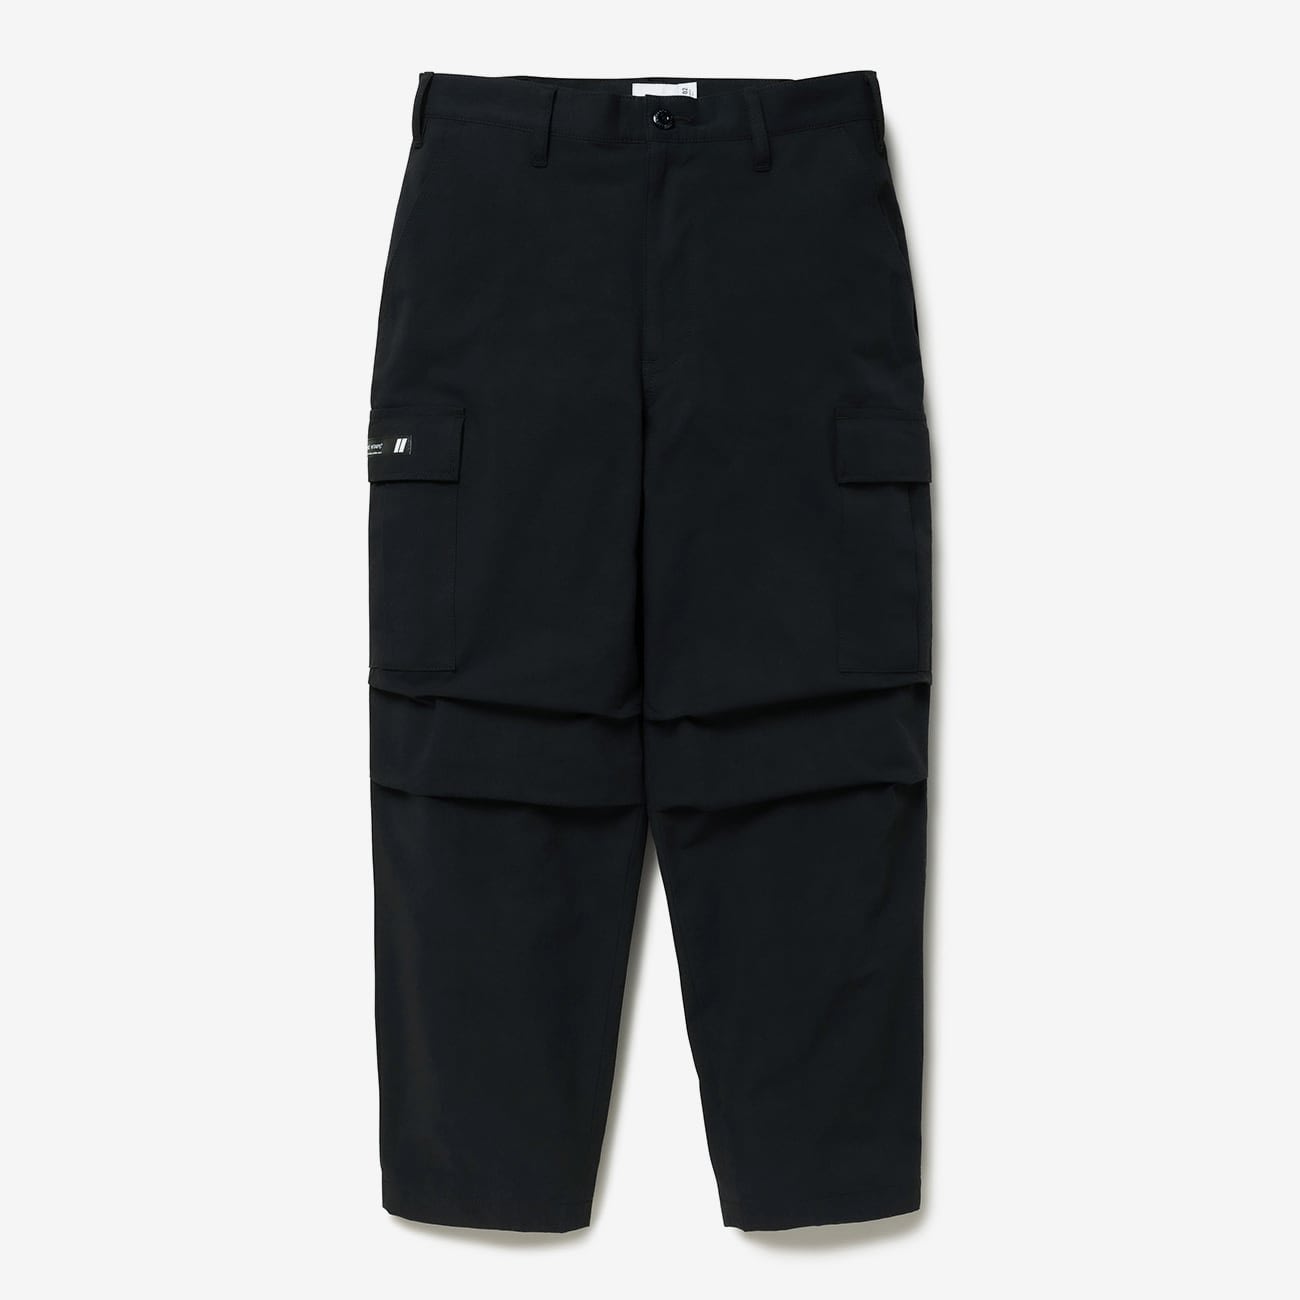 23SS WTAPS MIL TROUSERS NYCO RIPSTOP L-